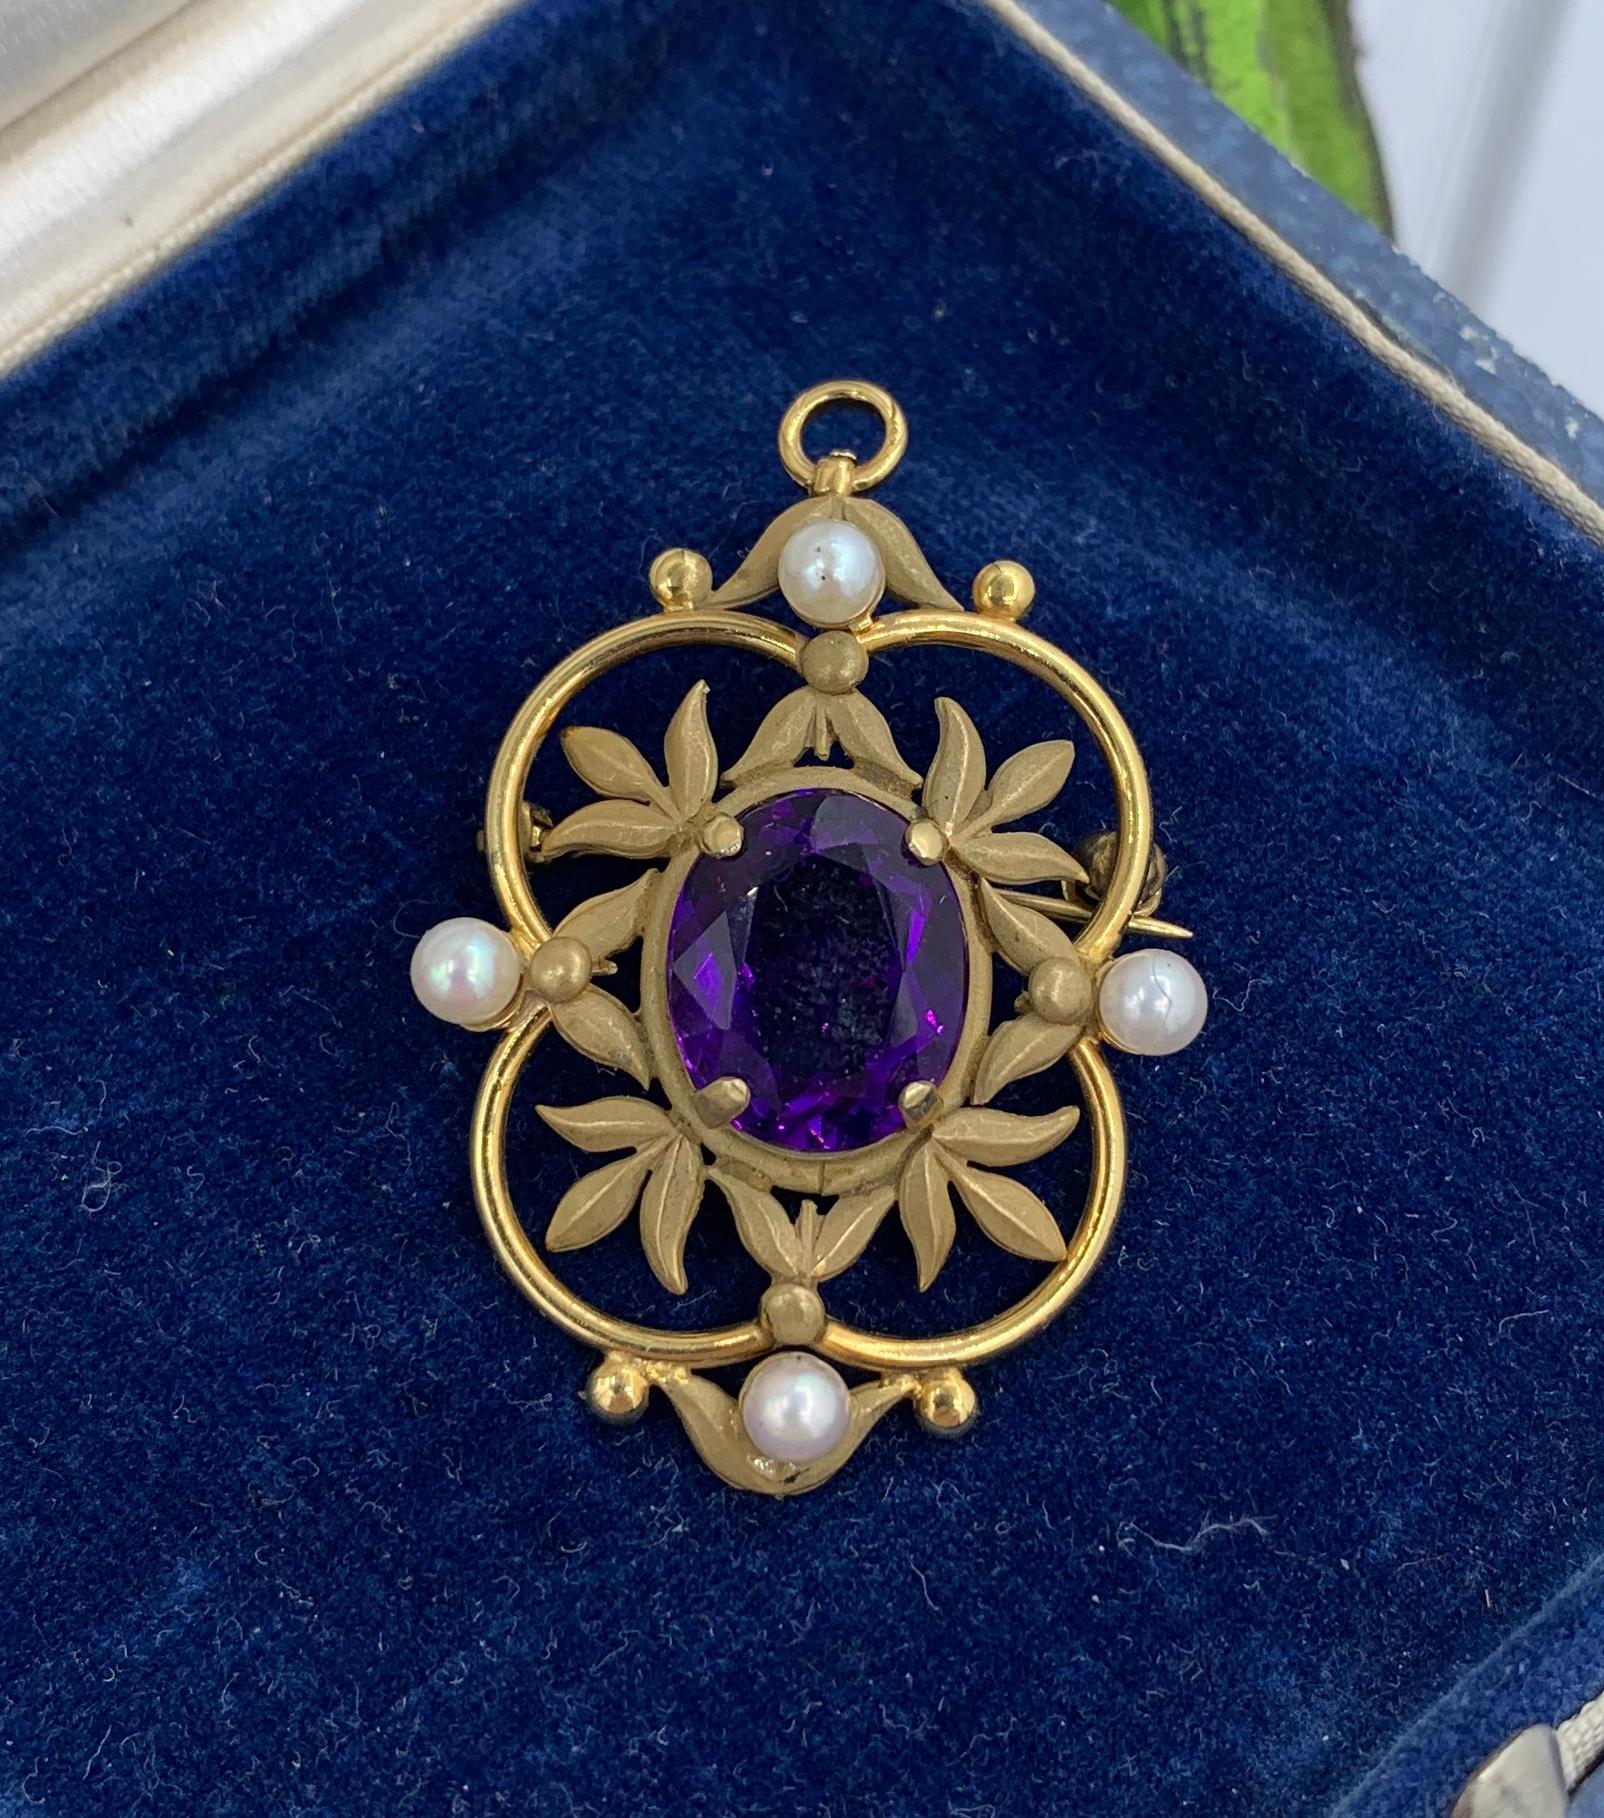 3.8 Carat Amethyst Pearl Lavalier Pendant Brooch Antique Victorian 14 Karat Gold In Excellent Condition For Sale In New York, NY